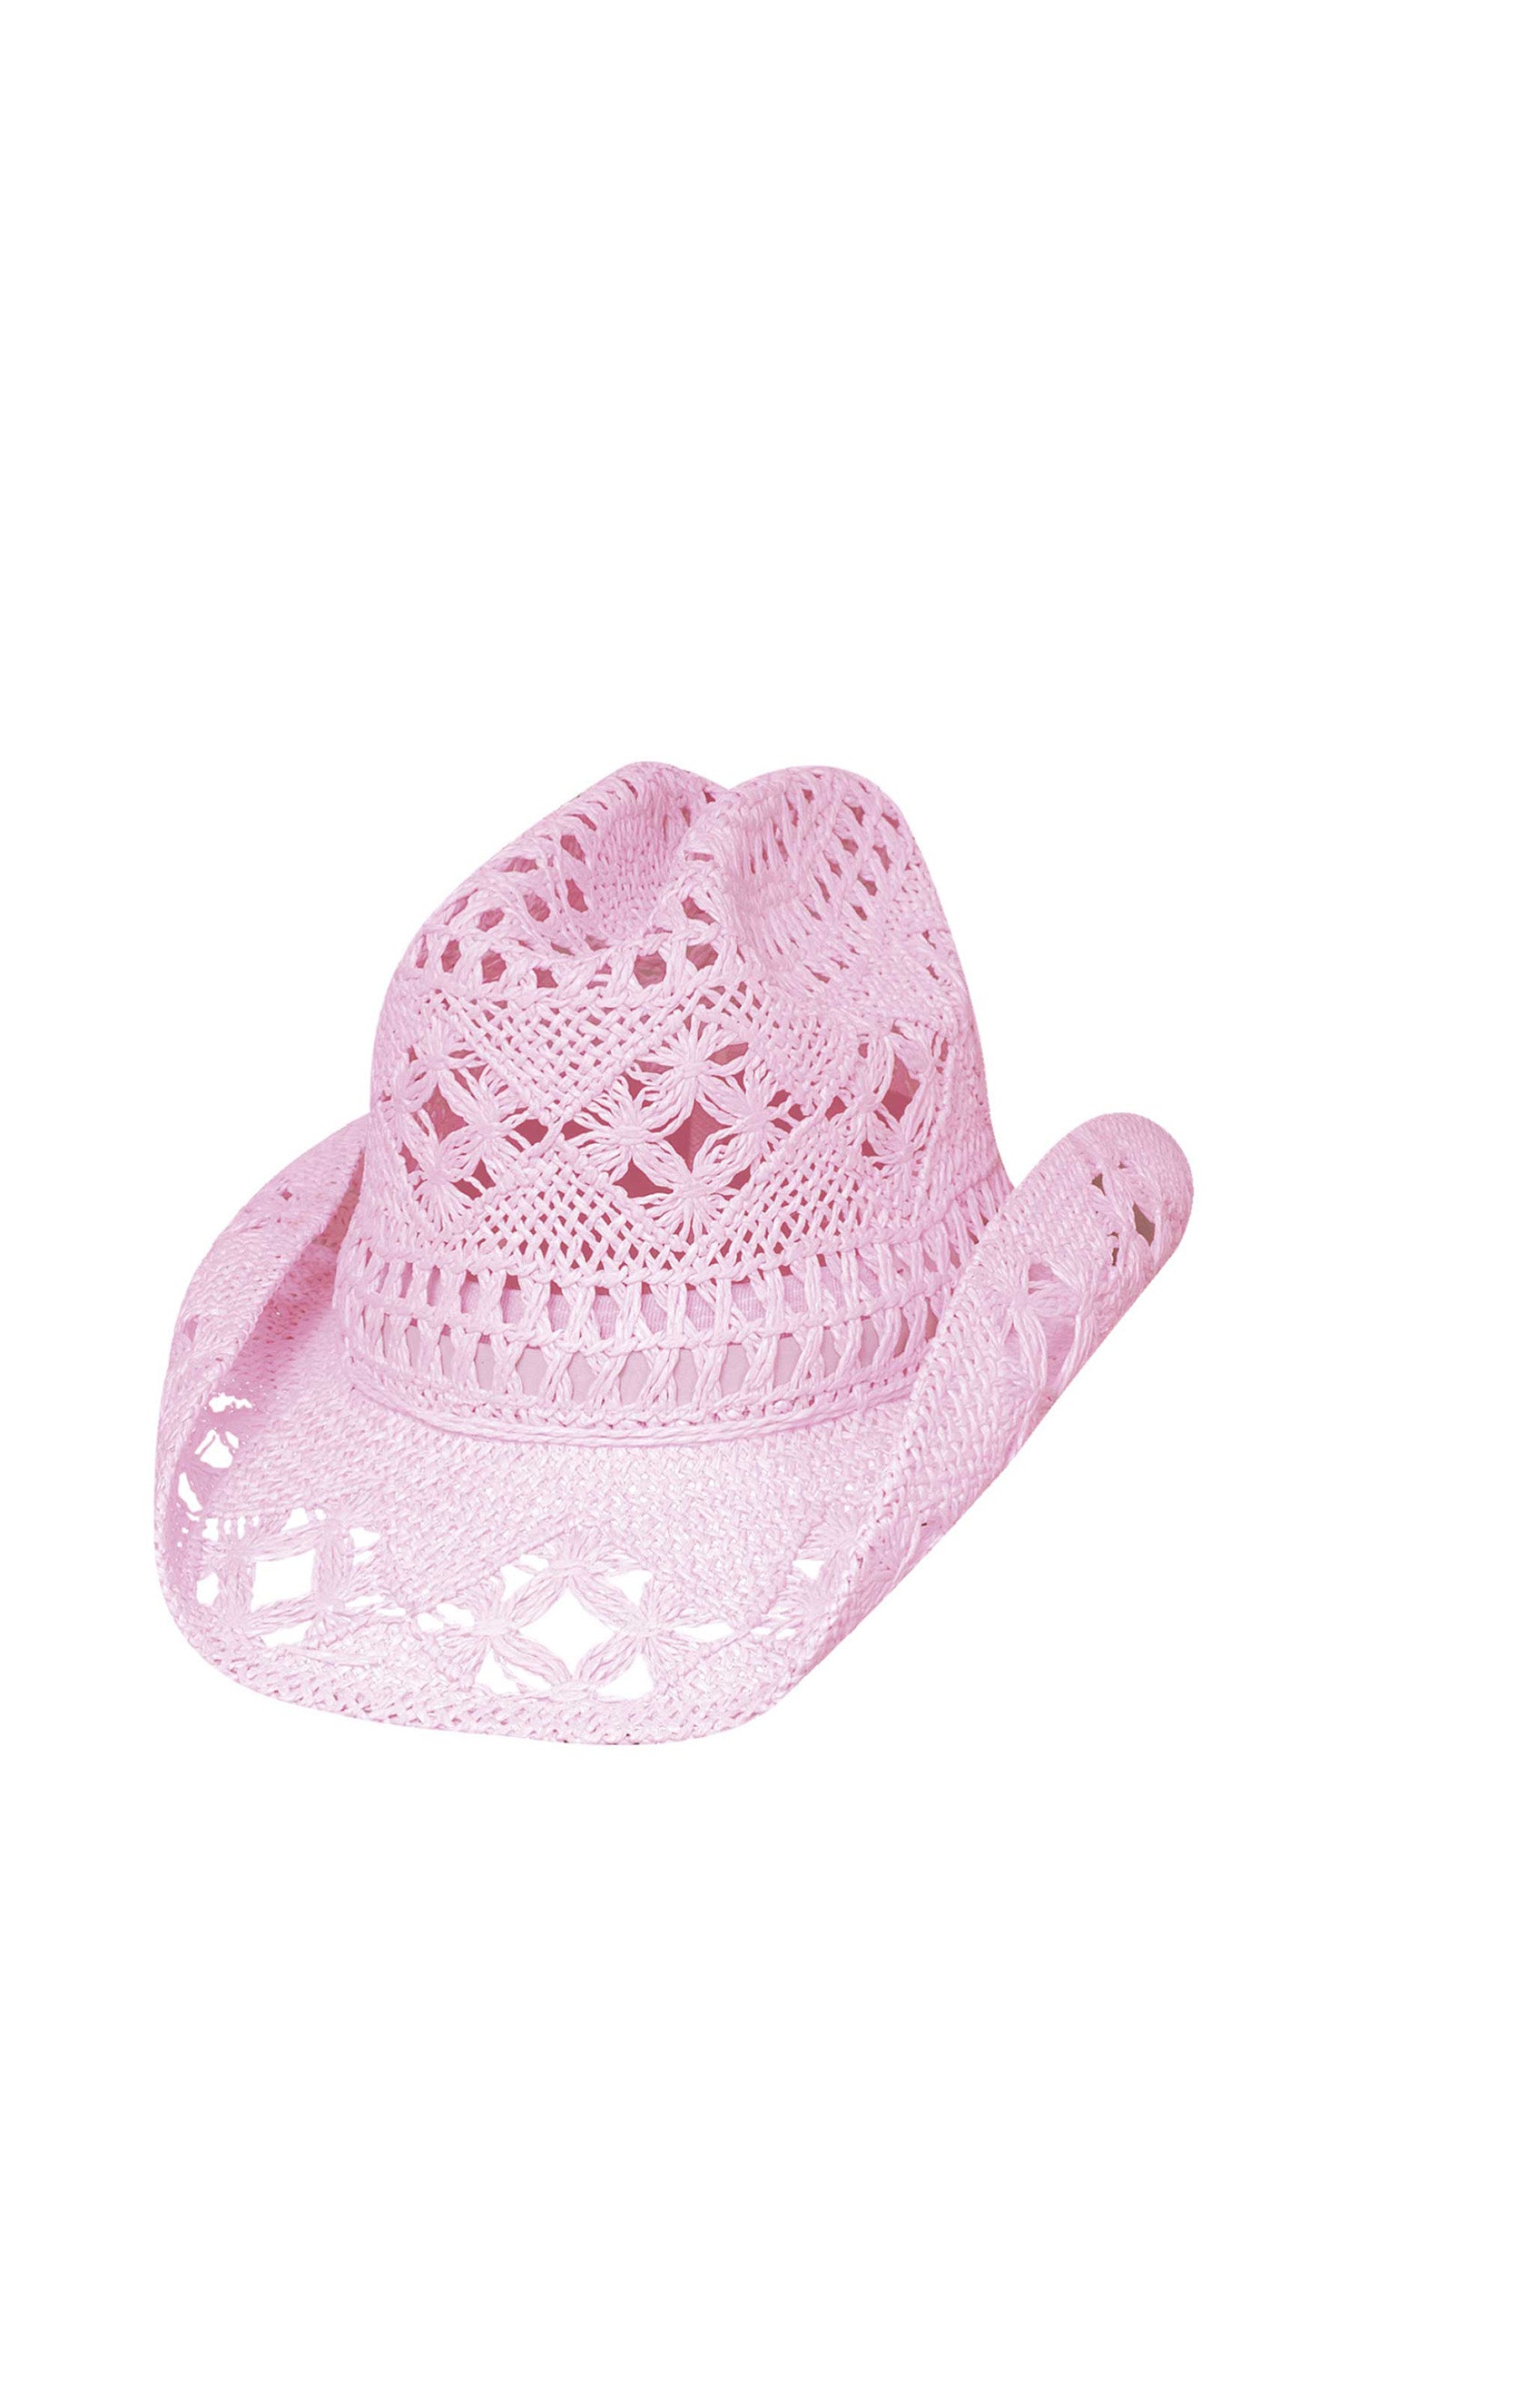 Bullhide Pink Youth Cowgirl Hat